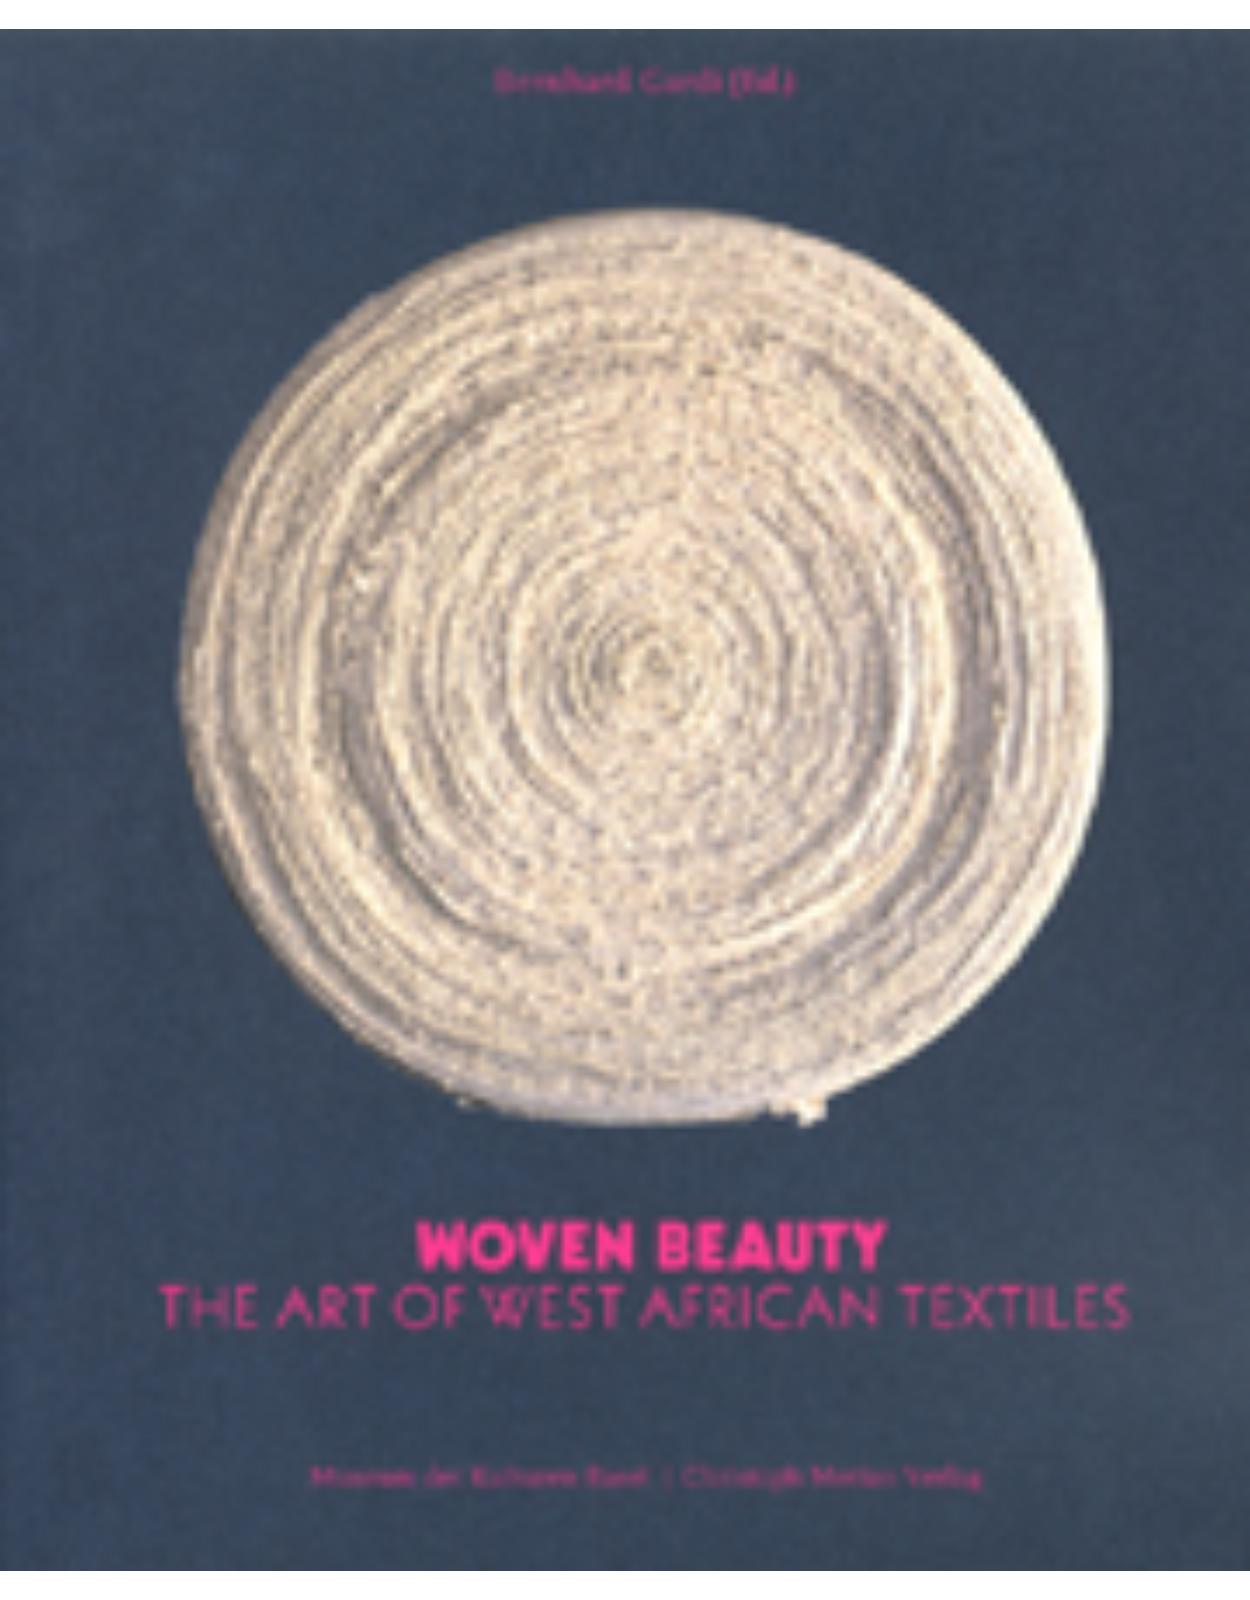 Woven Beauty: The Art of West African Textiles